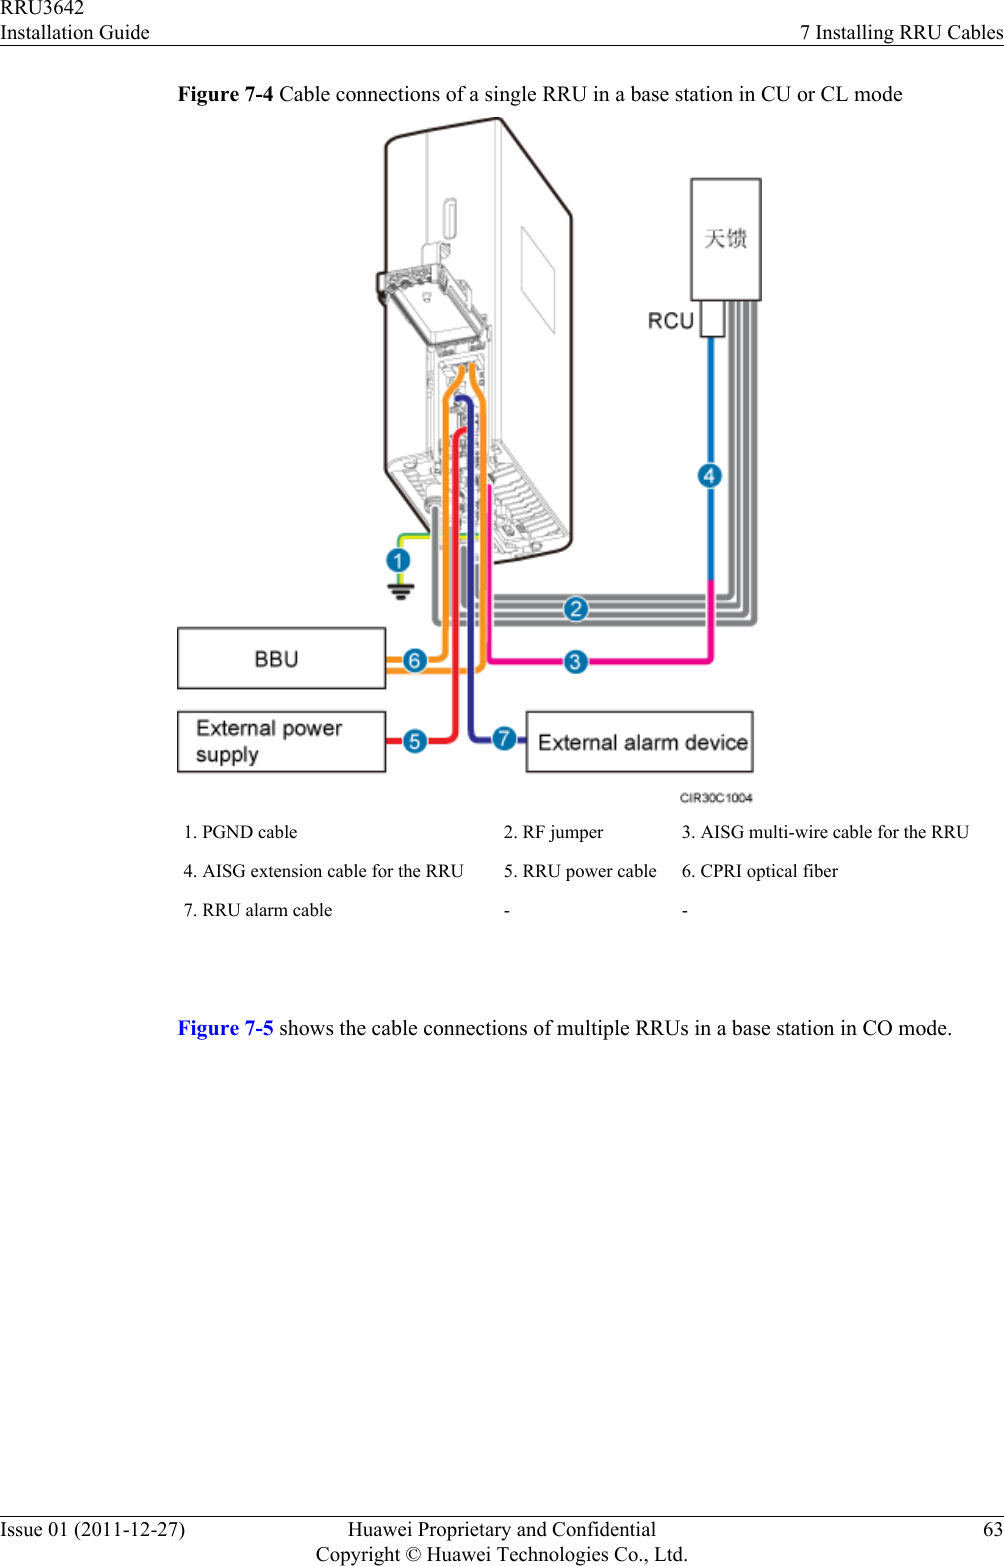 Figure 7-4 Cable connections of a single RRU in a base station in CU or CL mode1. PGND cable 2. RF jumper 3. AISG multi-wire cable for the RRU4. AISG extension cable for the RRU 5. RRU power cable 6. CPRI optical fiber7. RRU alarm cable - - Figure 7-5 shows the cable connections of multiple RRUs in a base station in CO mode.RRU3642Installation Guide 7 Installing RRU CablesIssue 01 (2011-12-27) Huawei Proprietary and ConfidentialCopyright © Huawei Technologies Co., Ltd.63